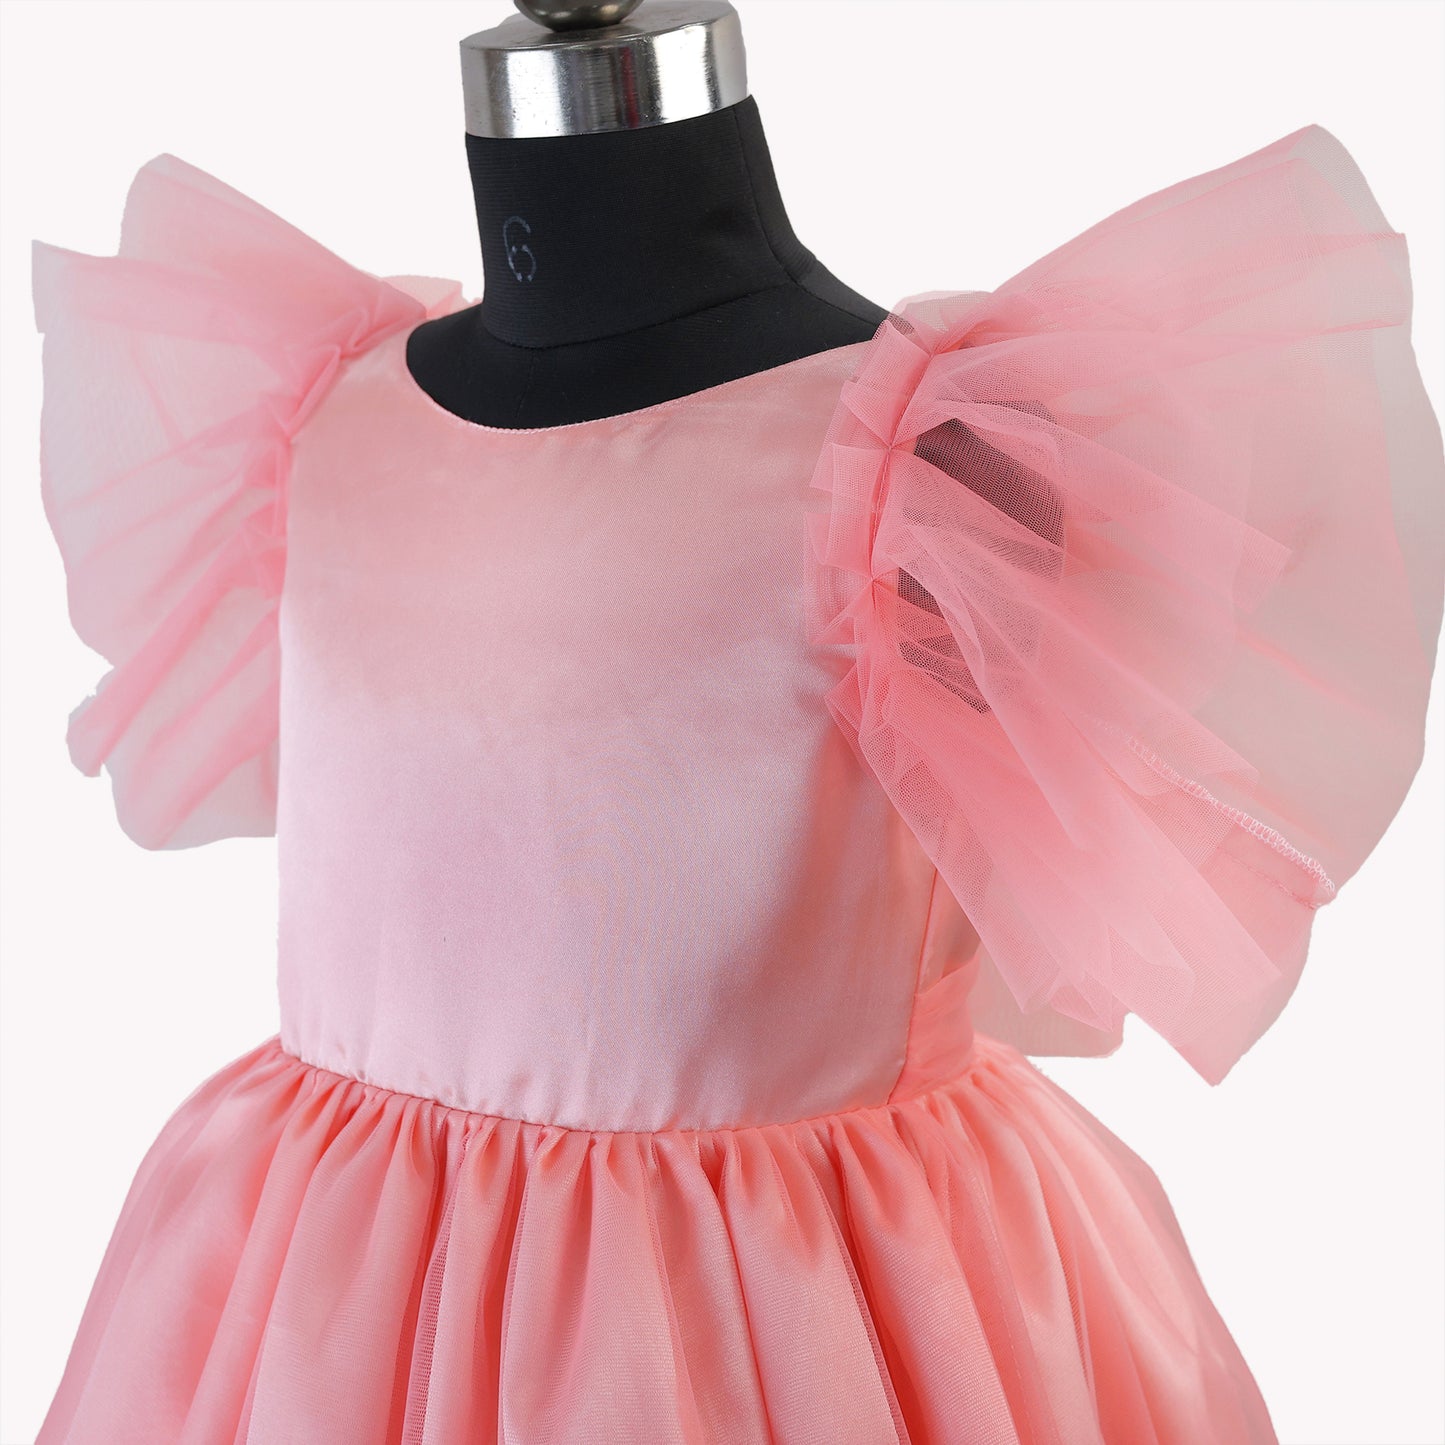 HEYKIDOO latest designer kids girls stylish peach solid frock comfortable Knee length birthday Party wear fashionable 6 years old unique most beautiful trendy candy dress buy online shopping India